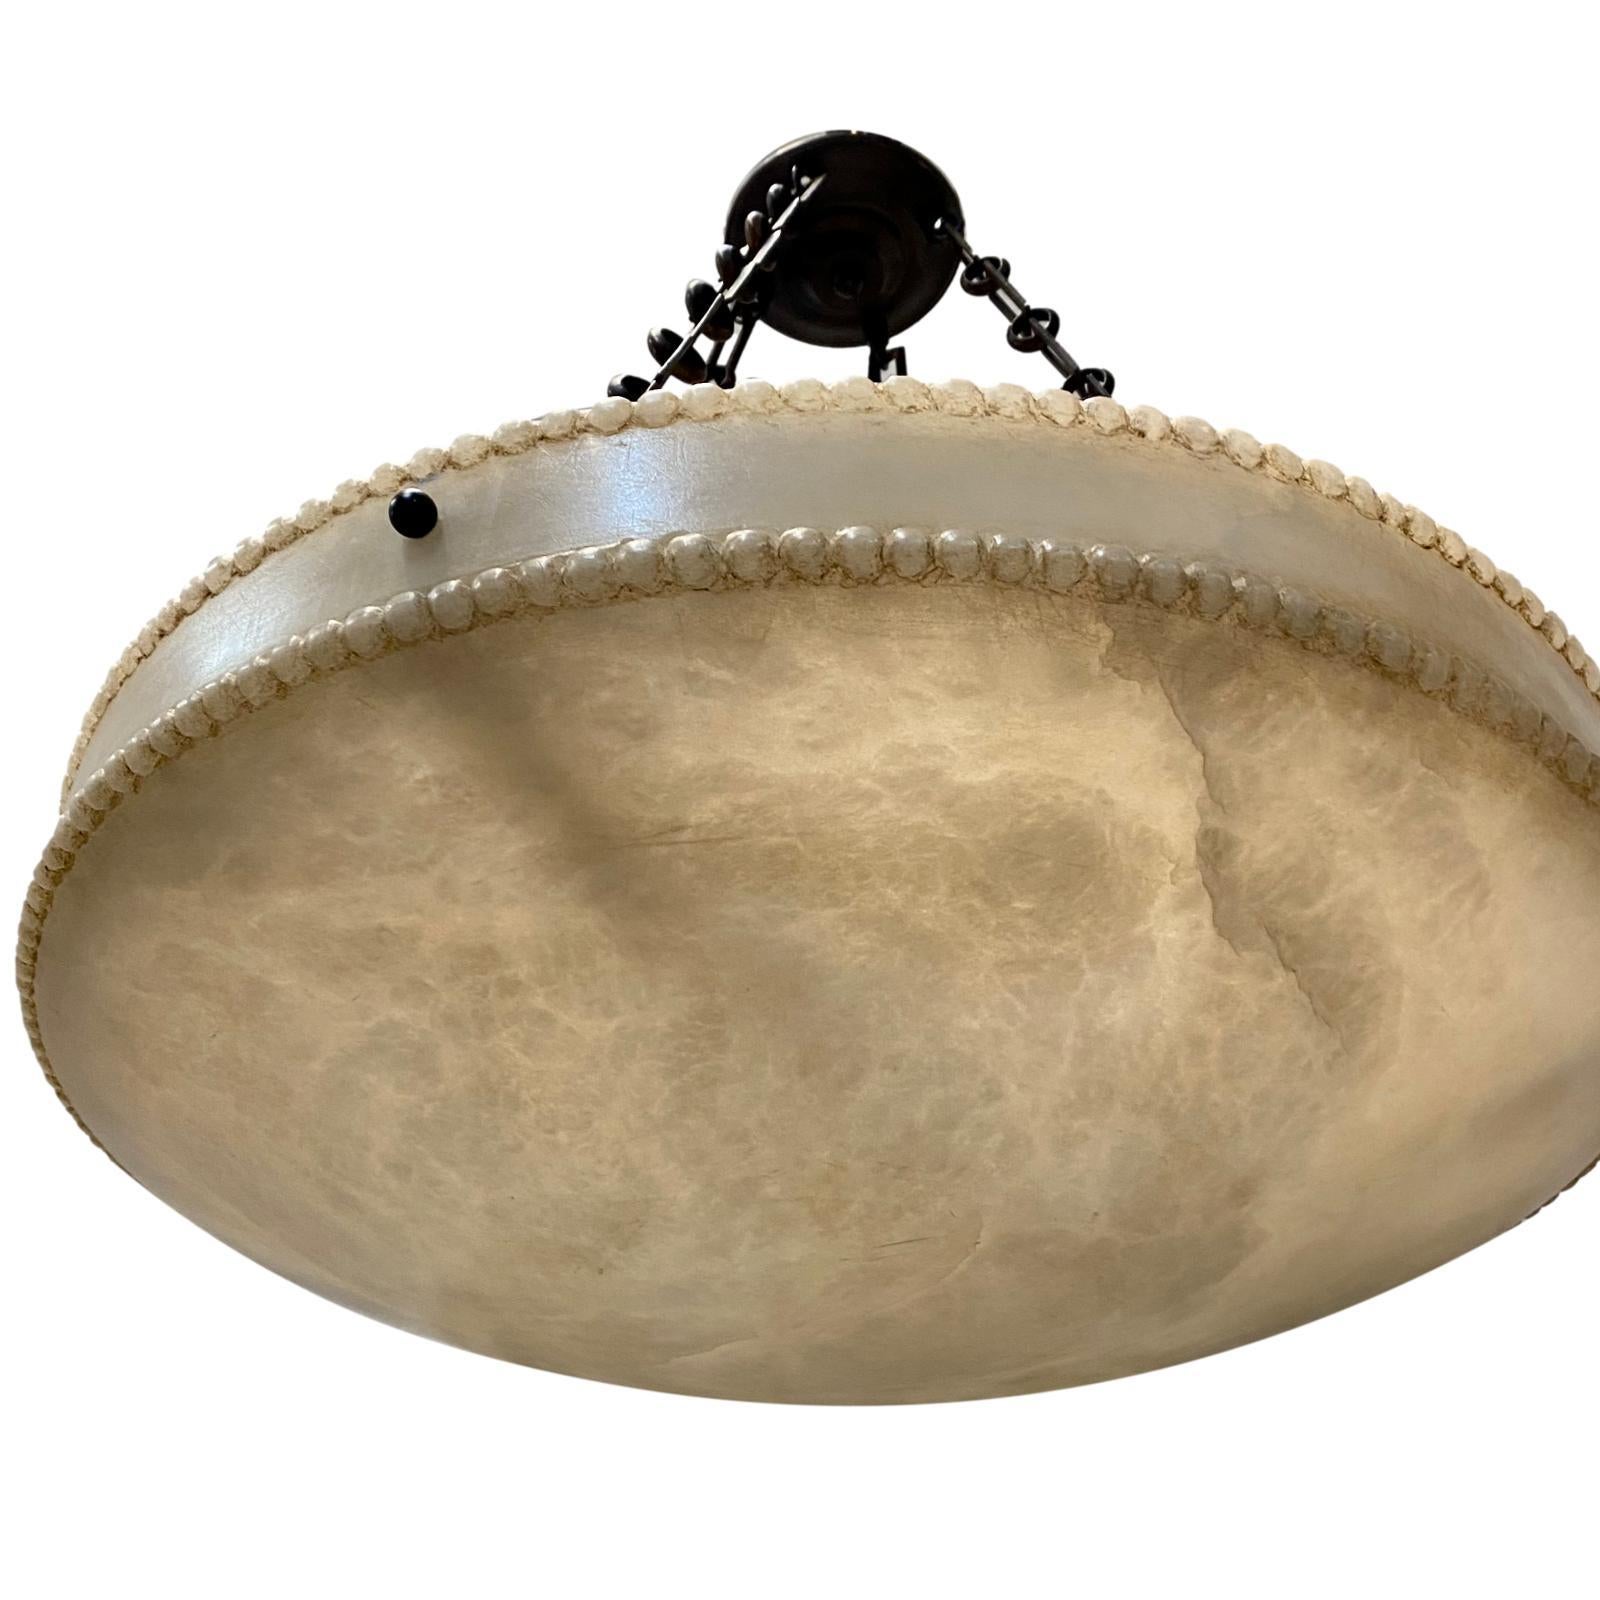 A circa 1960's French neoclassic style carved alabaster light fixture.

Measurements:
Current drop: 24